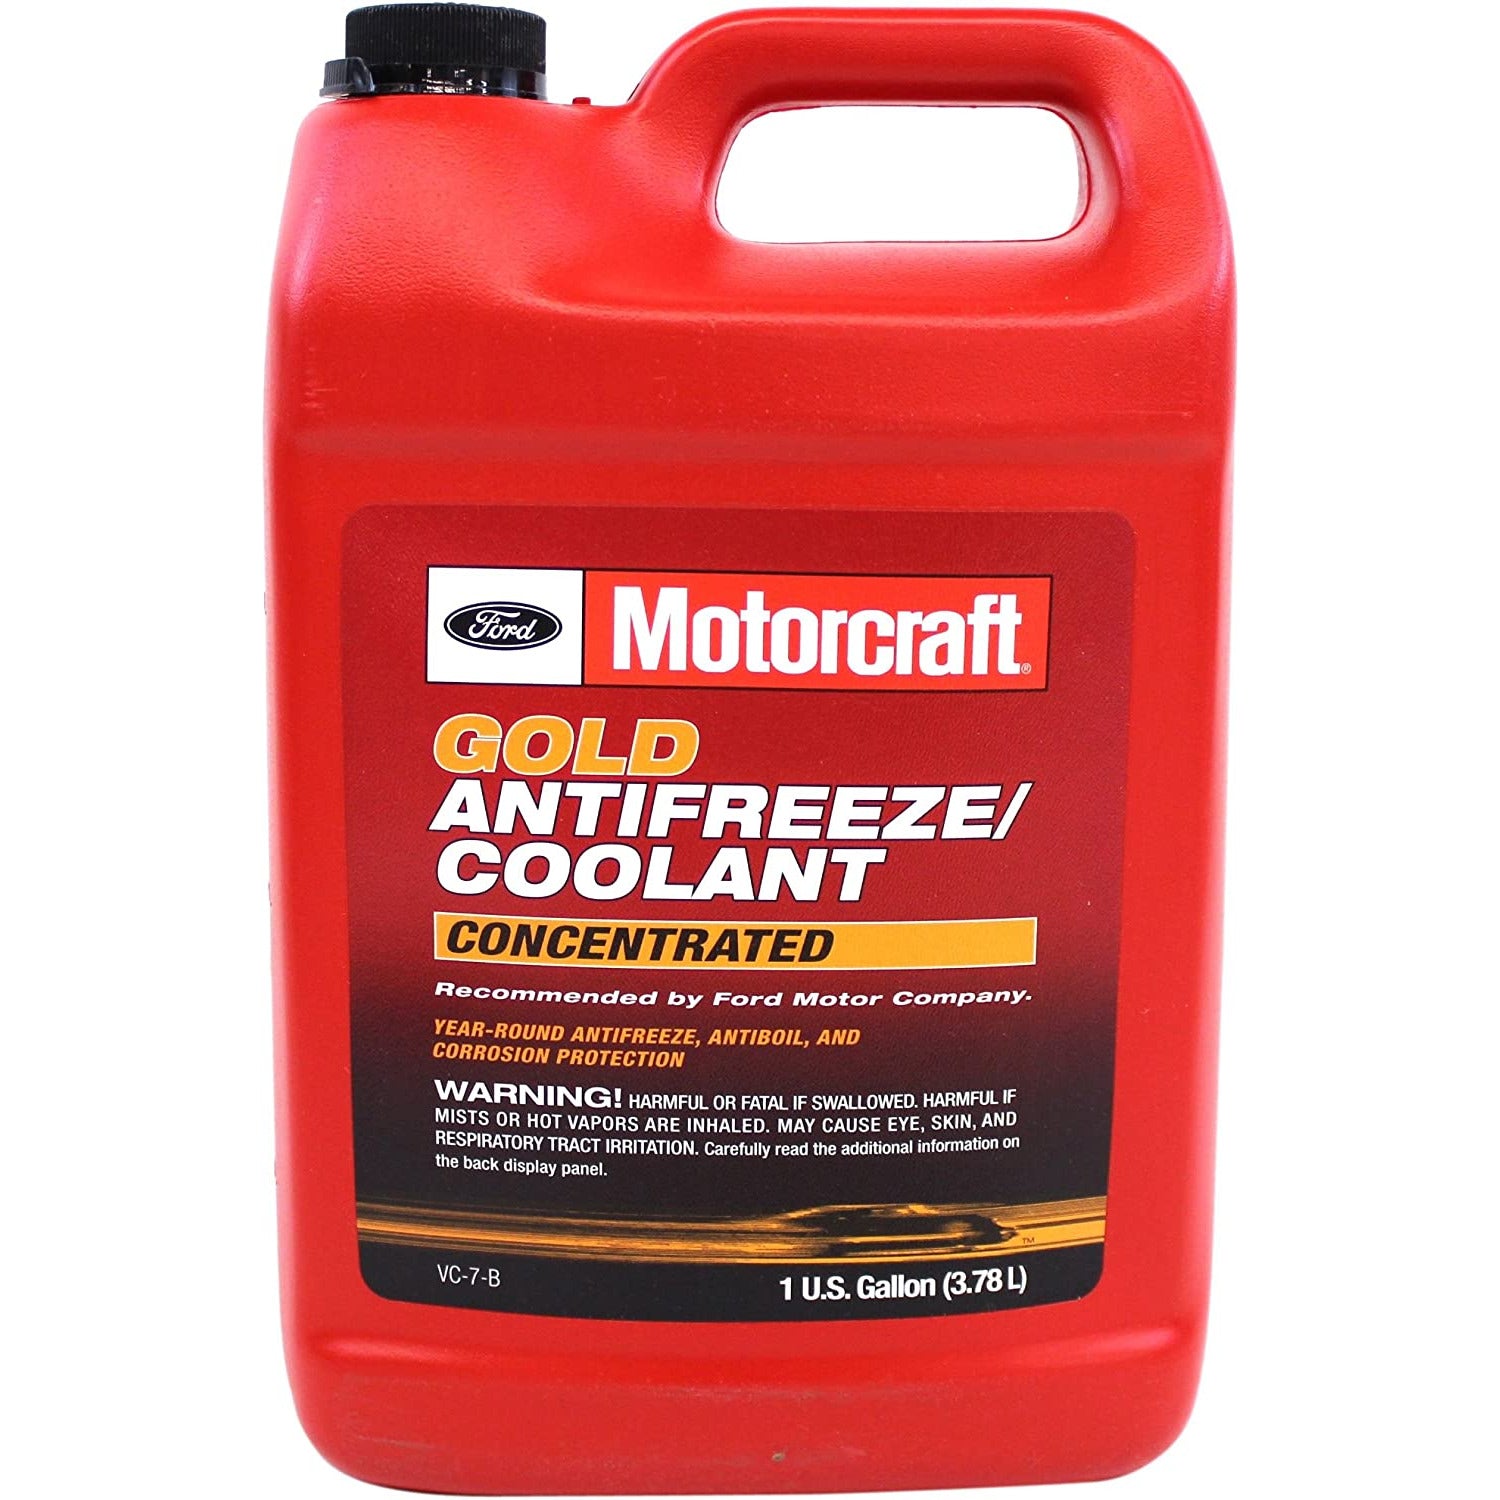 XFM VC7B Motorcraft Antifreeze/Coolant Concentrated (Gold, 1 Gal)